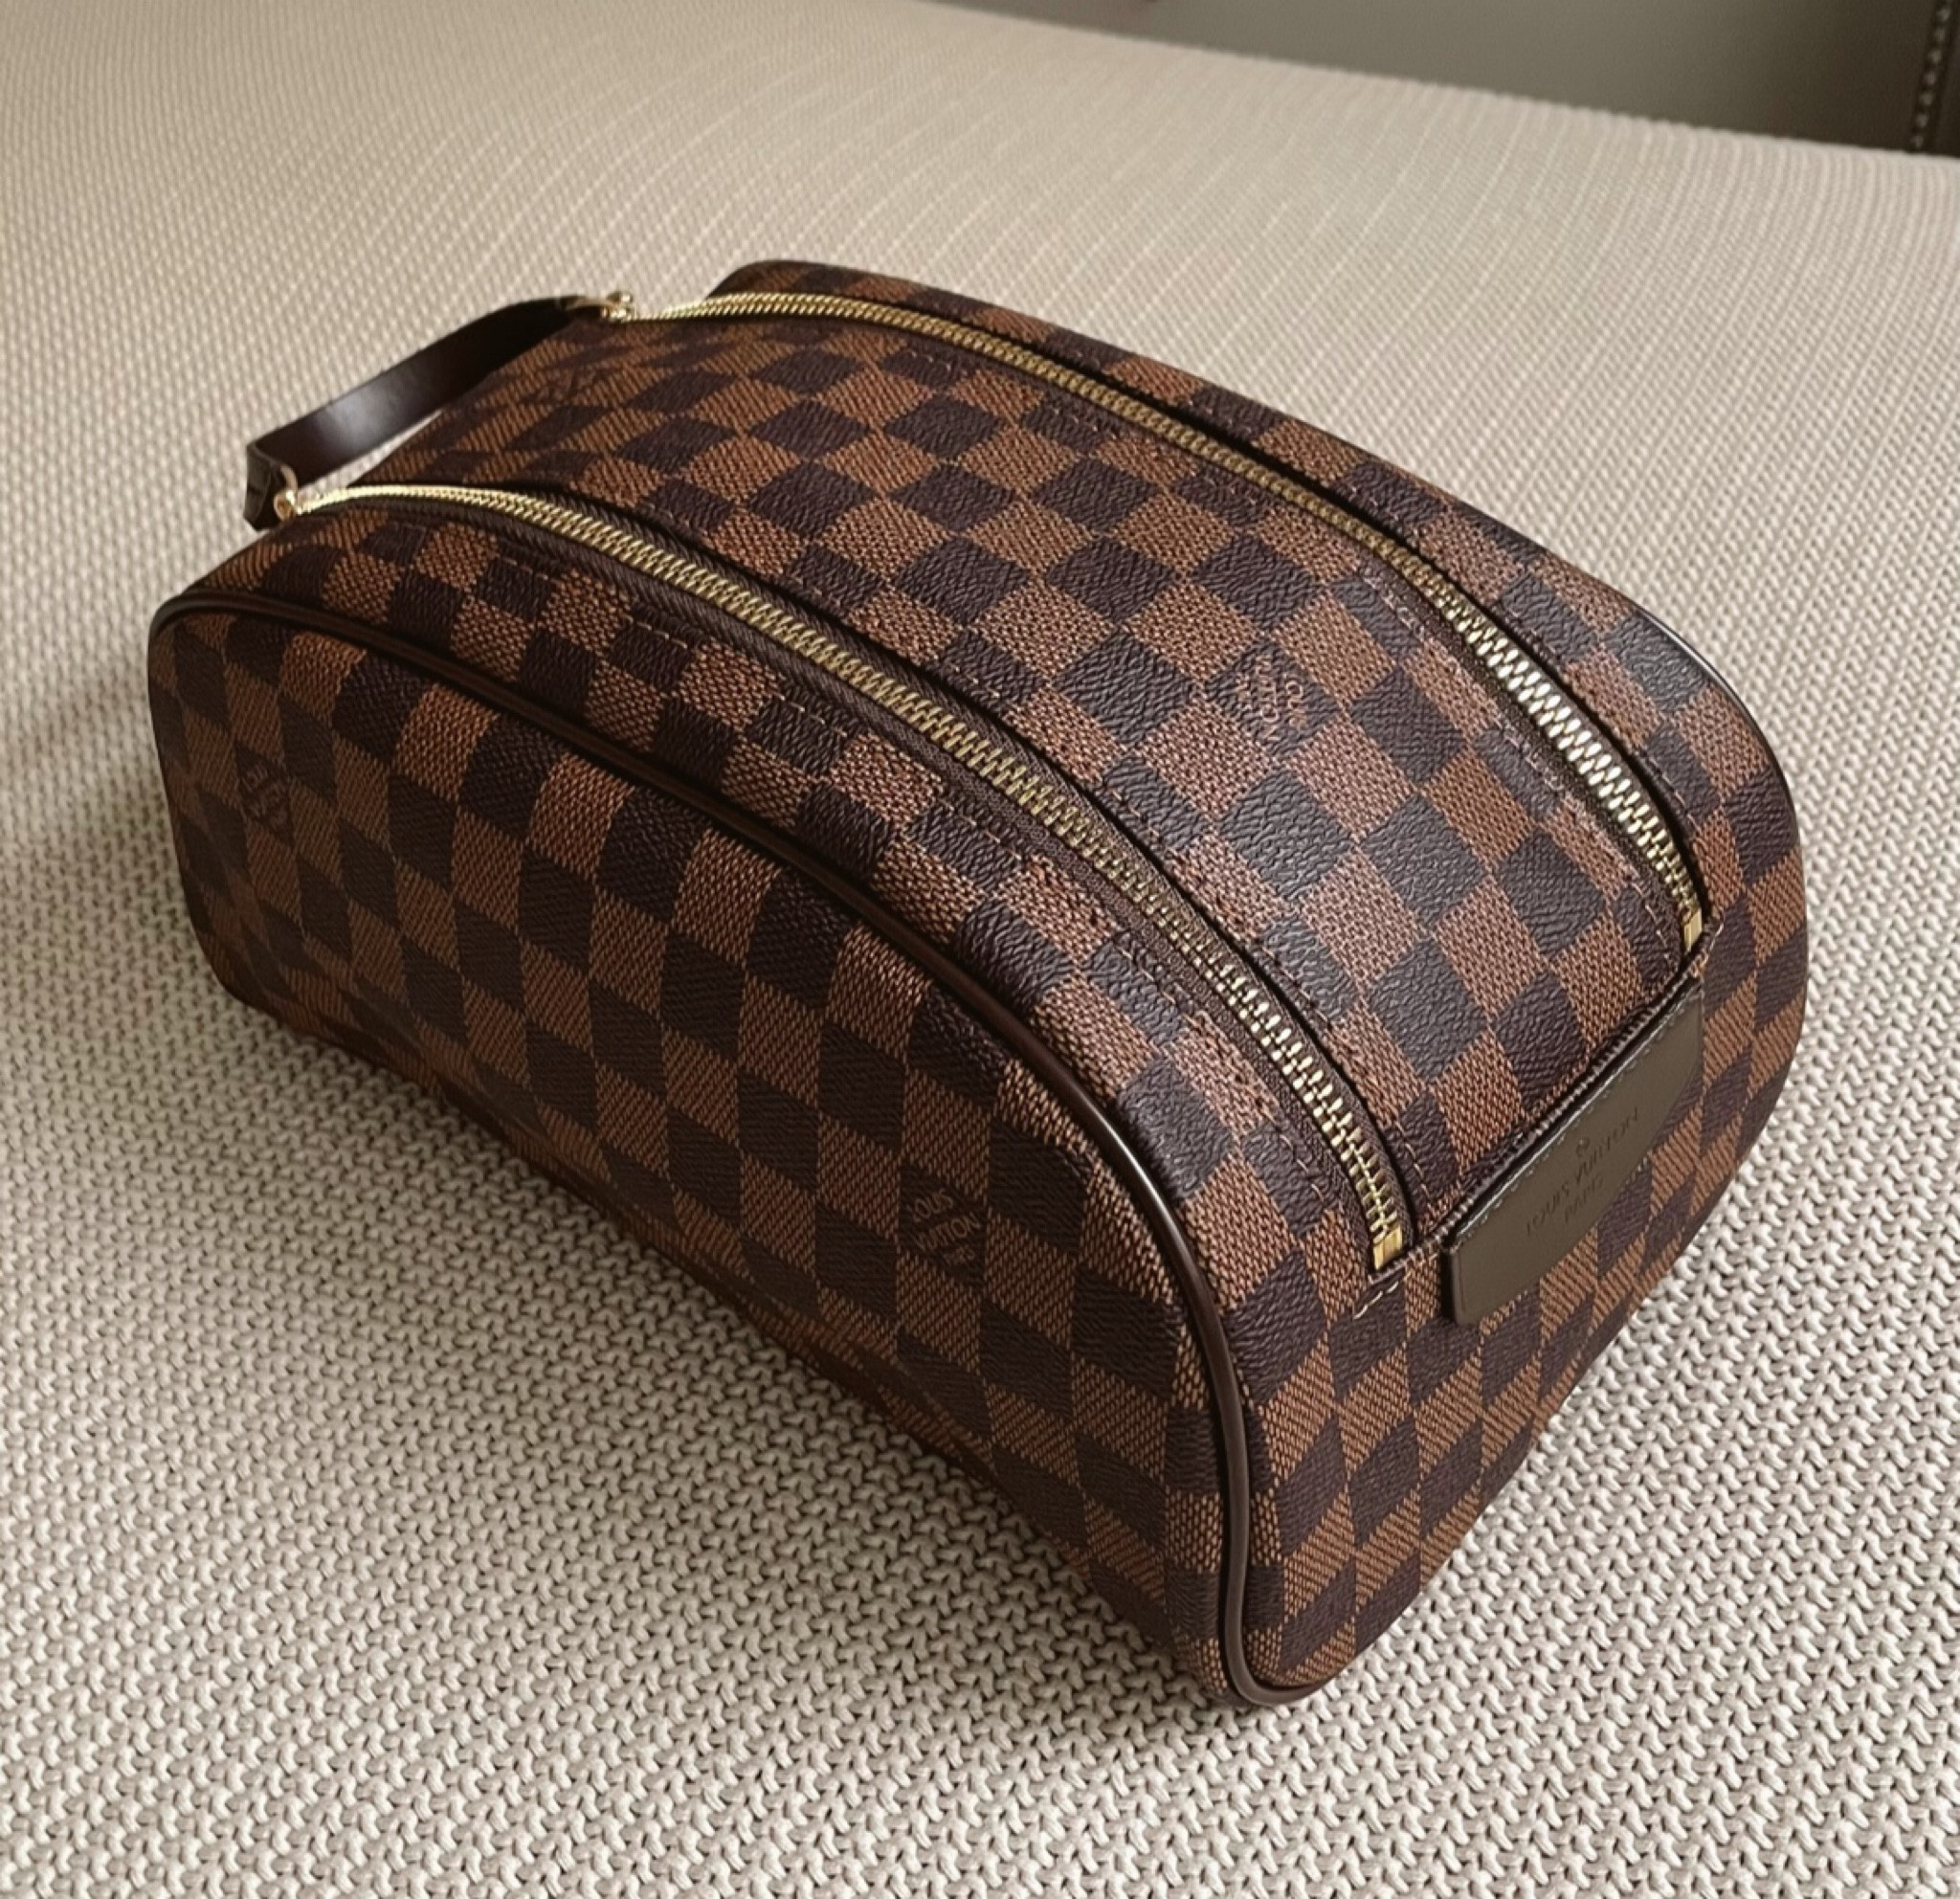 LOUIS VUITTON cosmetic bag KING SIZE toiletry bag, collection